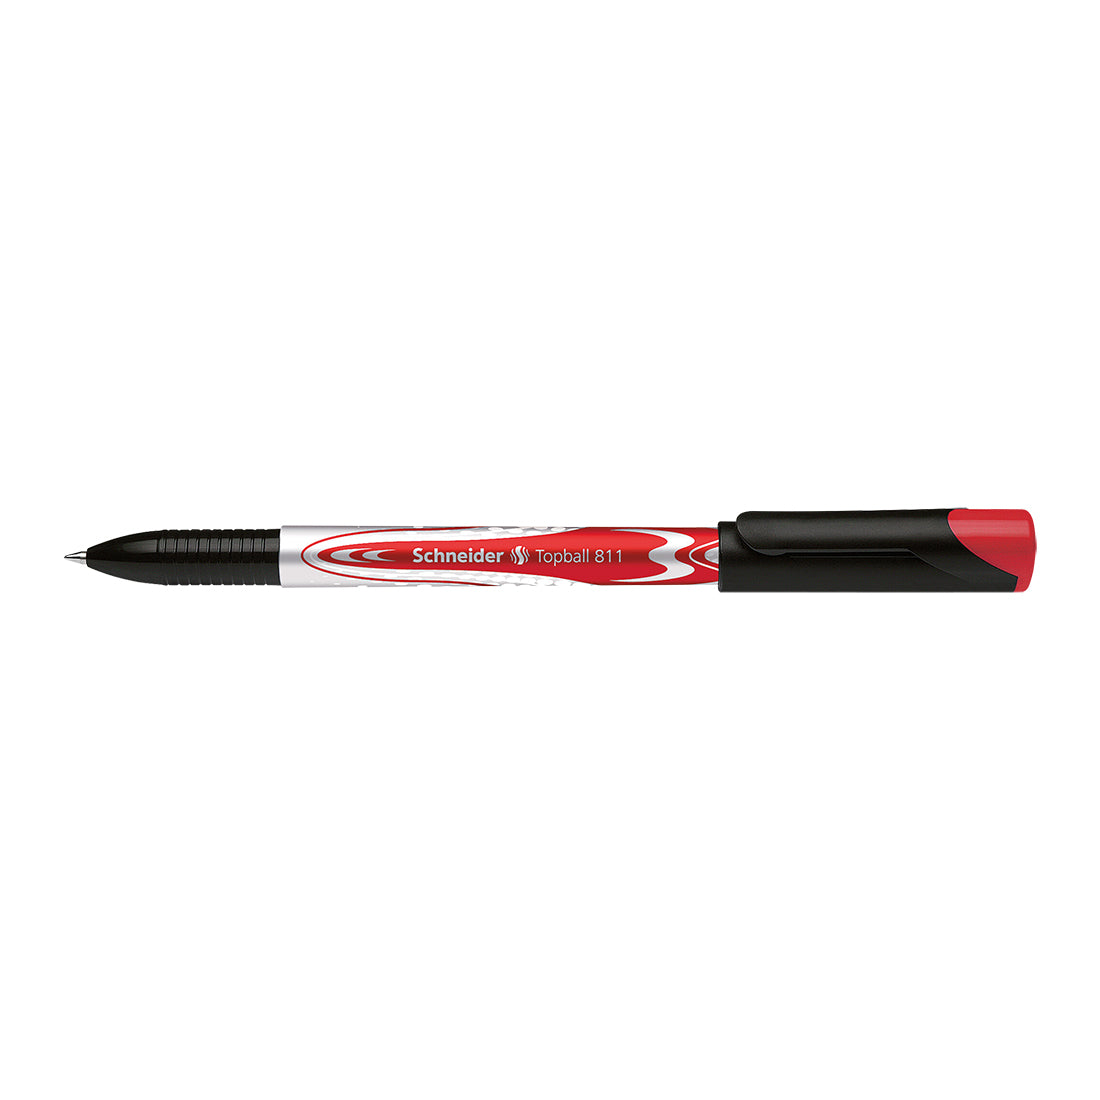 Topball 811 Rollerball 0.5mm, Box of 10#ink-colour_red